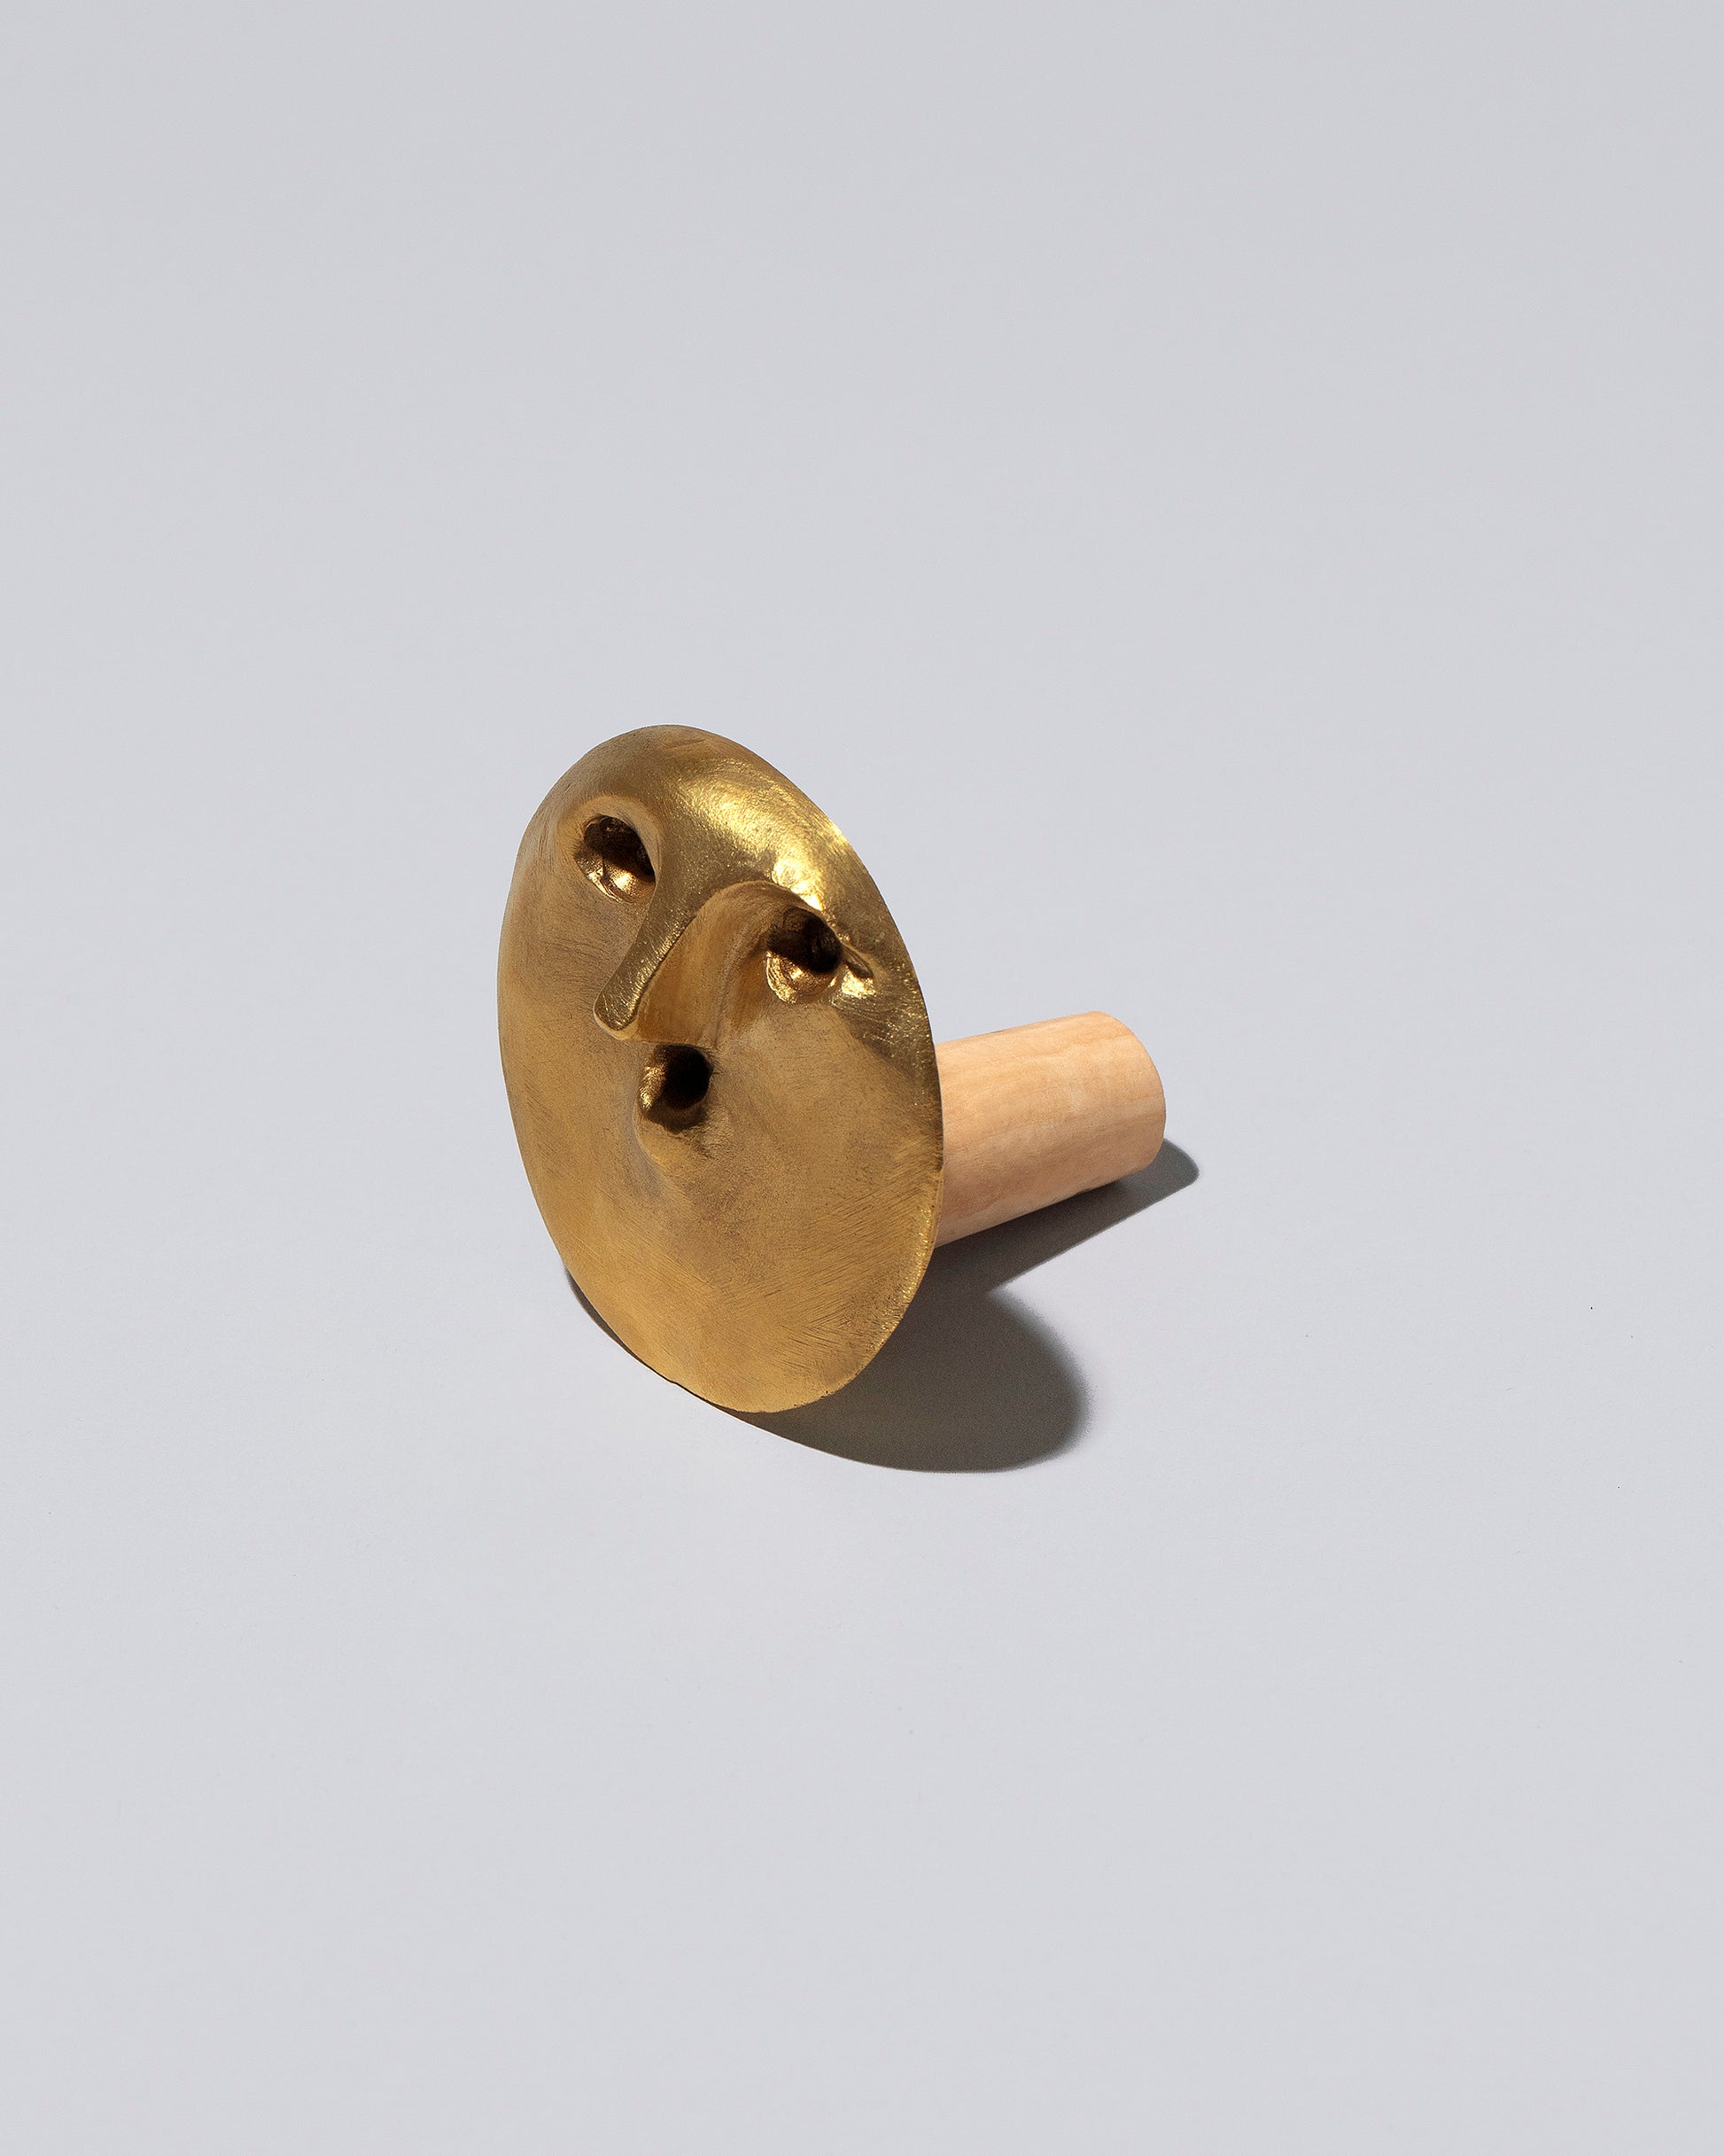 View from the side of the Carl Auböck Uranio Brass Face Bottle Stopper on light color background.